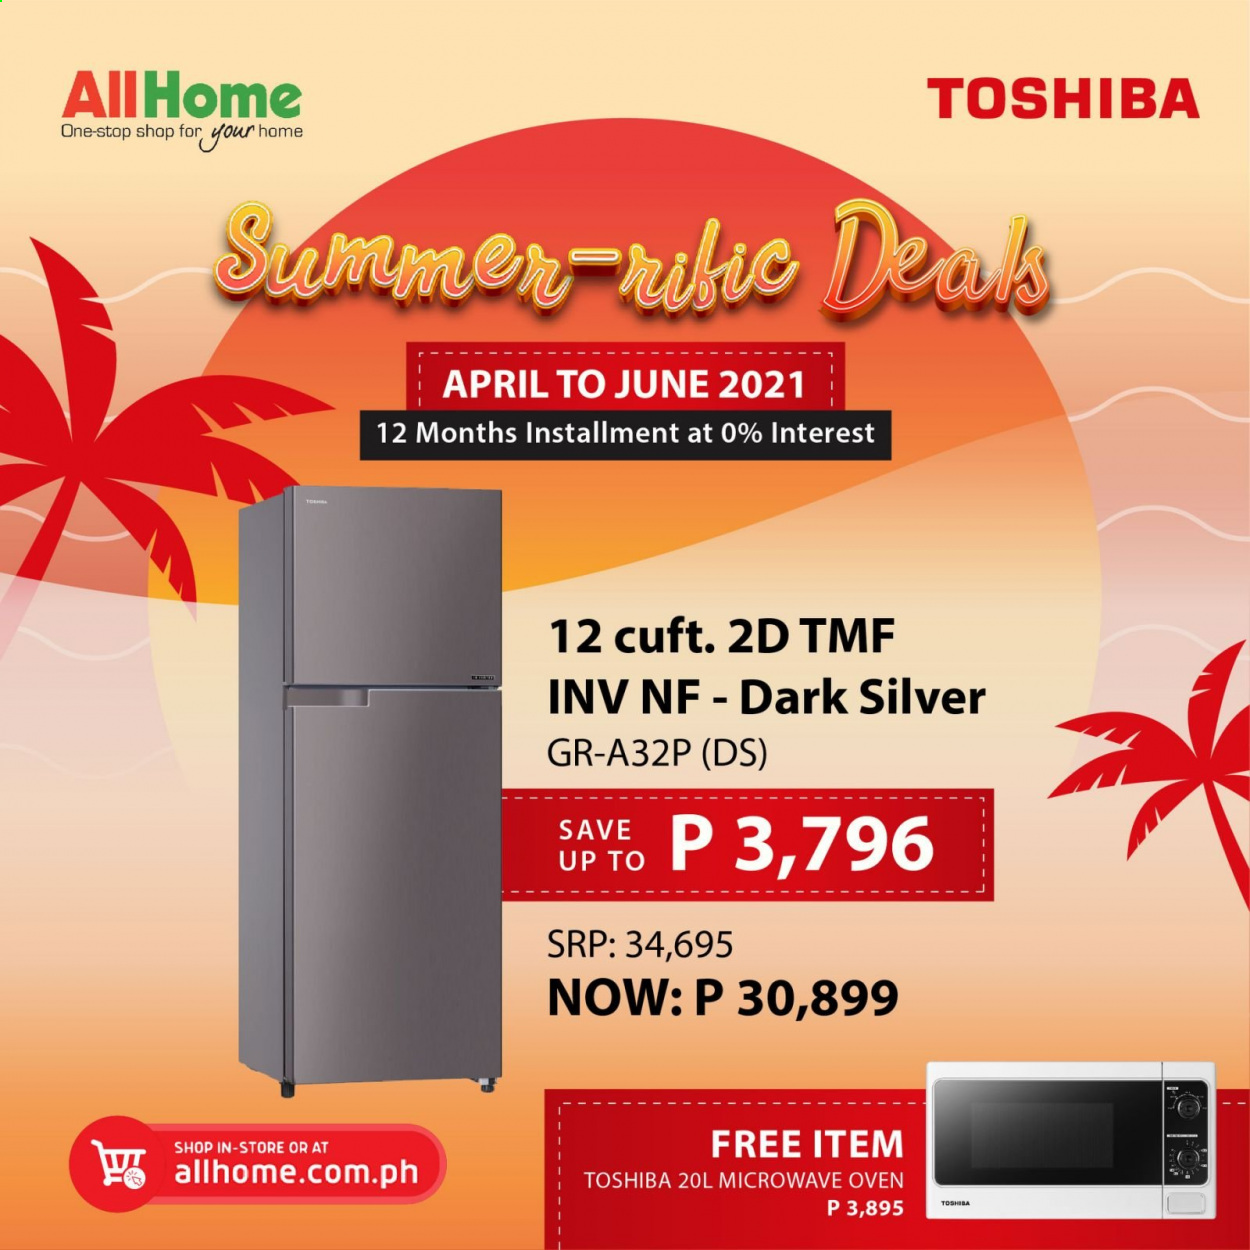 thumbnail - AllHome offer  - Sales products - Toshiba, oven, microwave. Page 2.